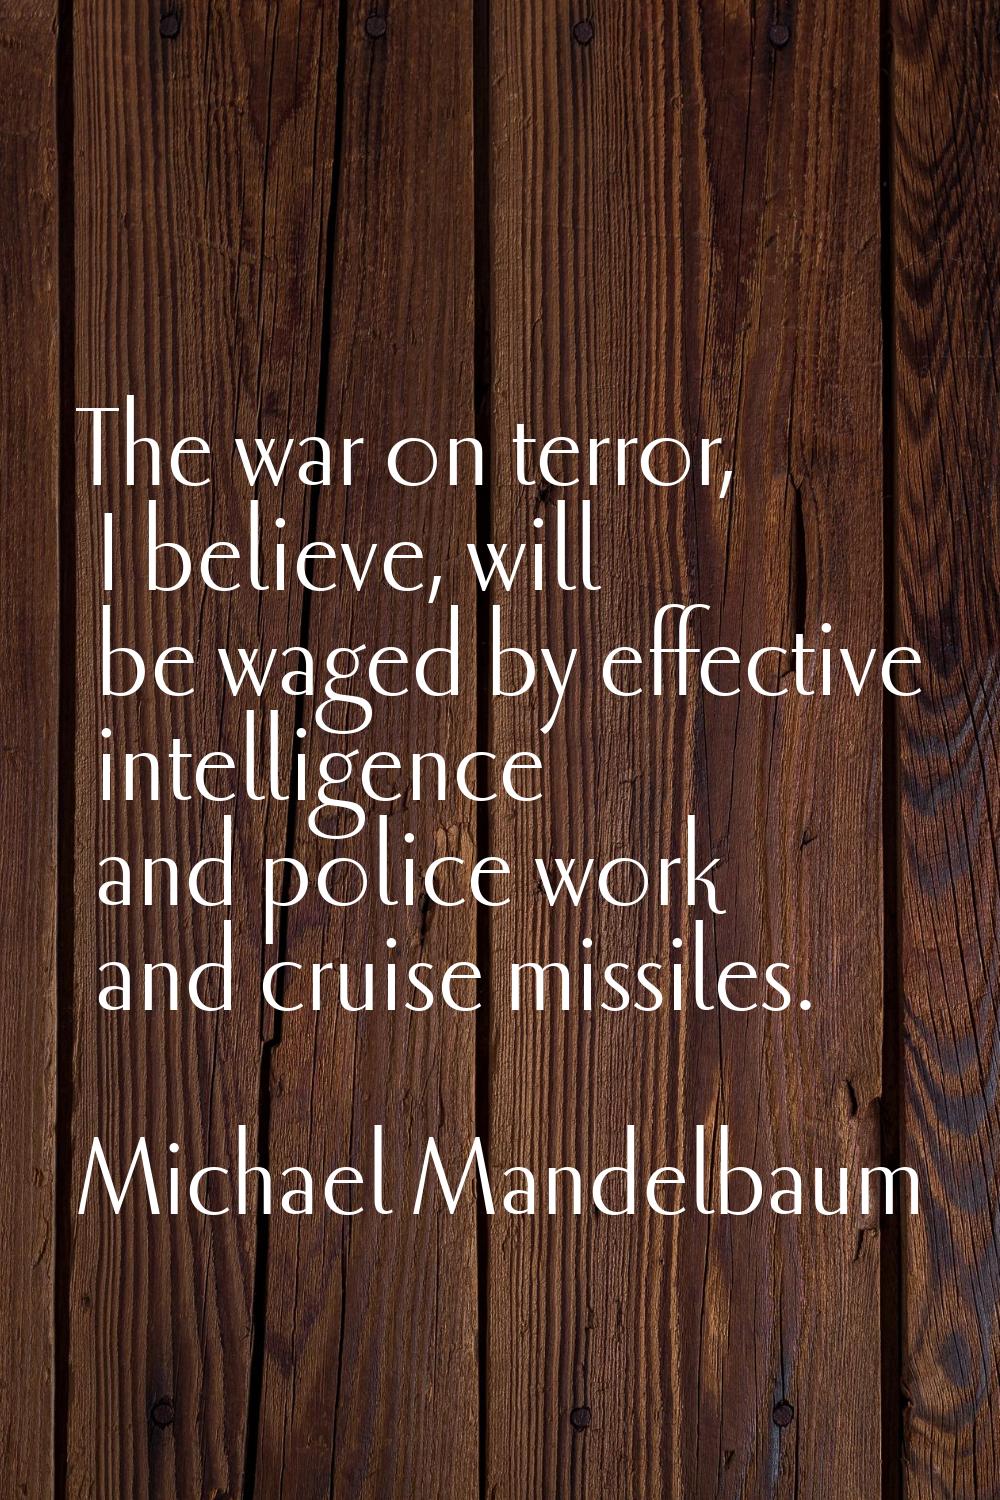 The war on terror, I believe, will be waged by effective intelligence and police work and cruise mi